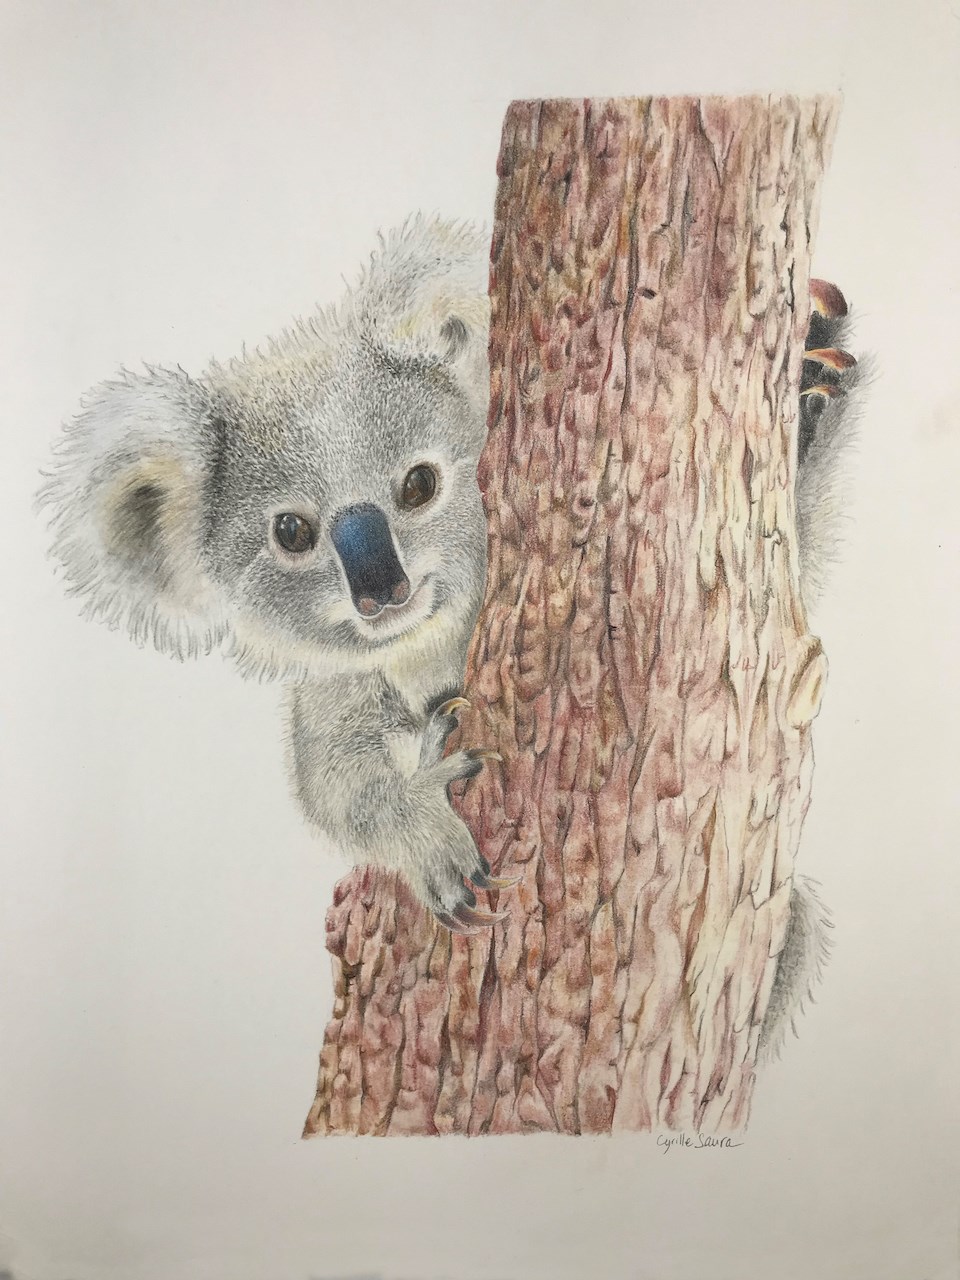 A limited number of koala prints are for sale to raise money for fire-affected wildlife in Aus.